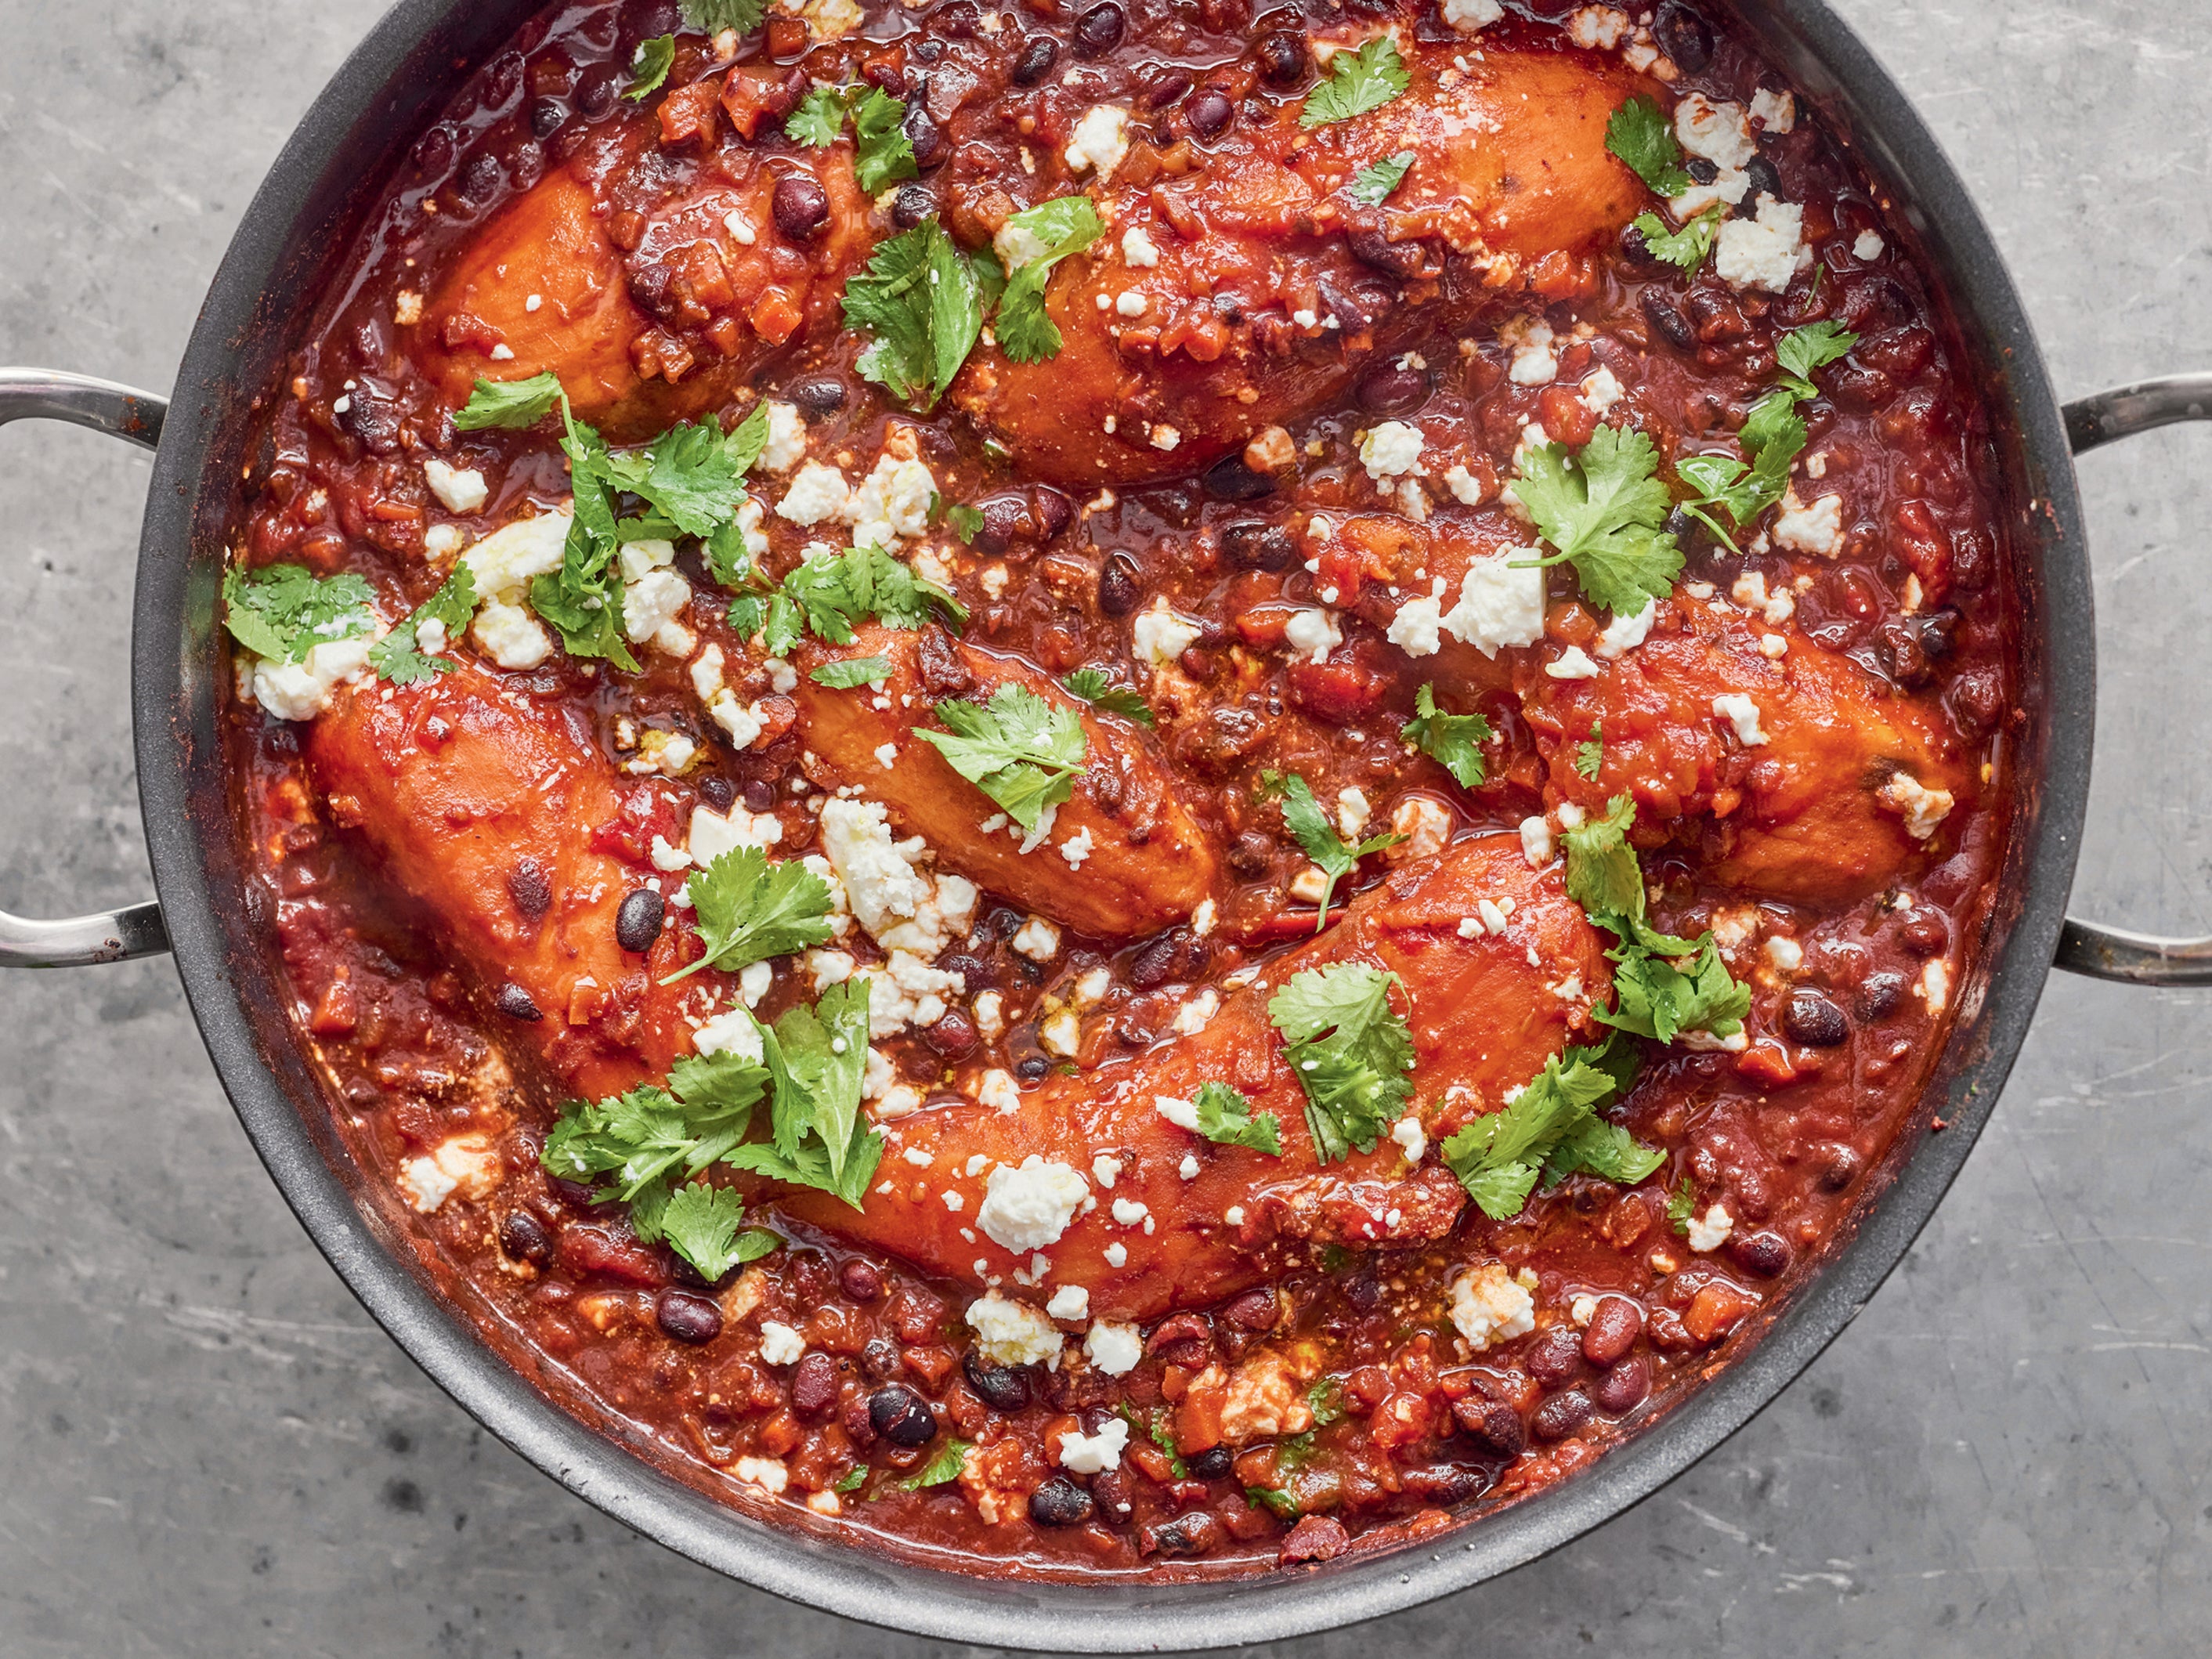 This chilli is hearty and warming, just in time for autumn